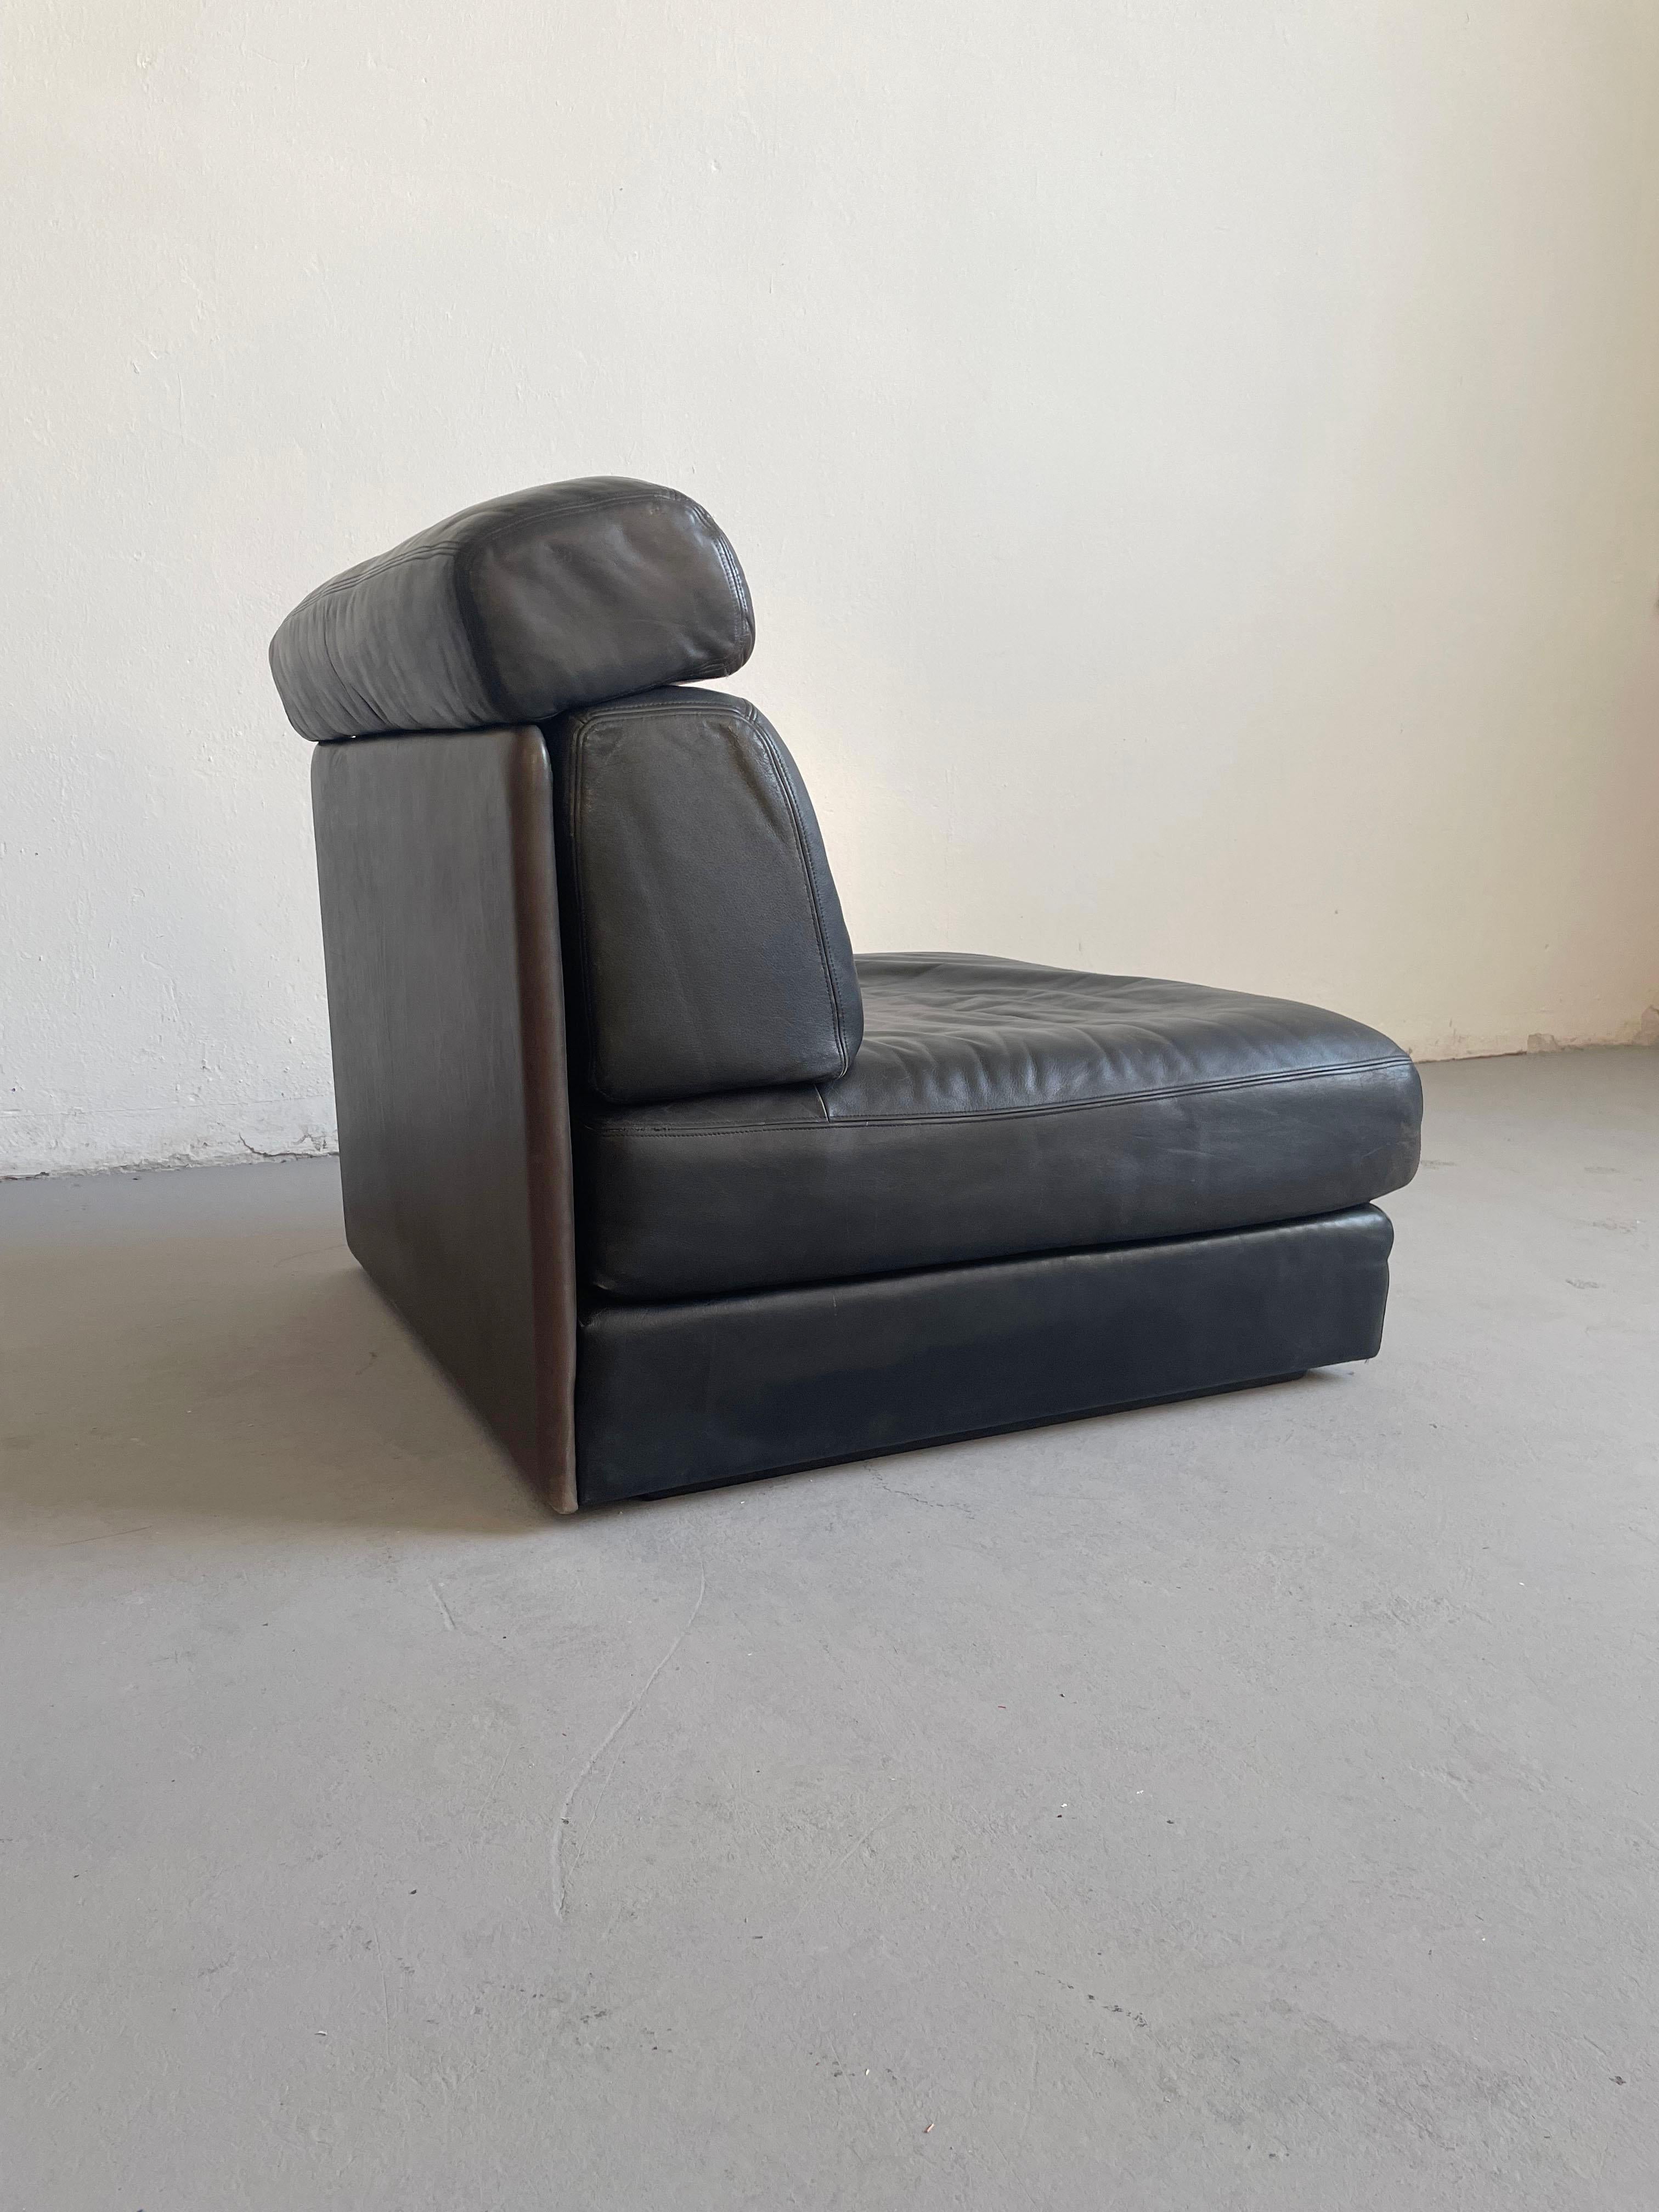 Late 20th Century Vintage De Sede 'DS-77' Sofa Bed in Black Leather, 1-Seater Module, Lounge Chair